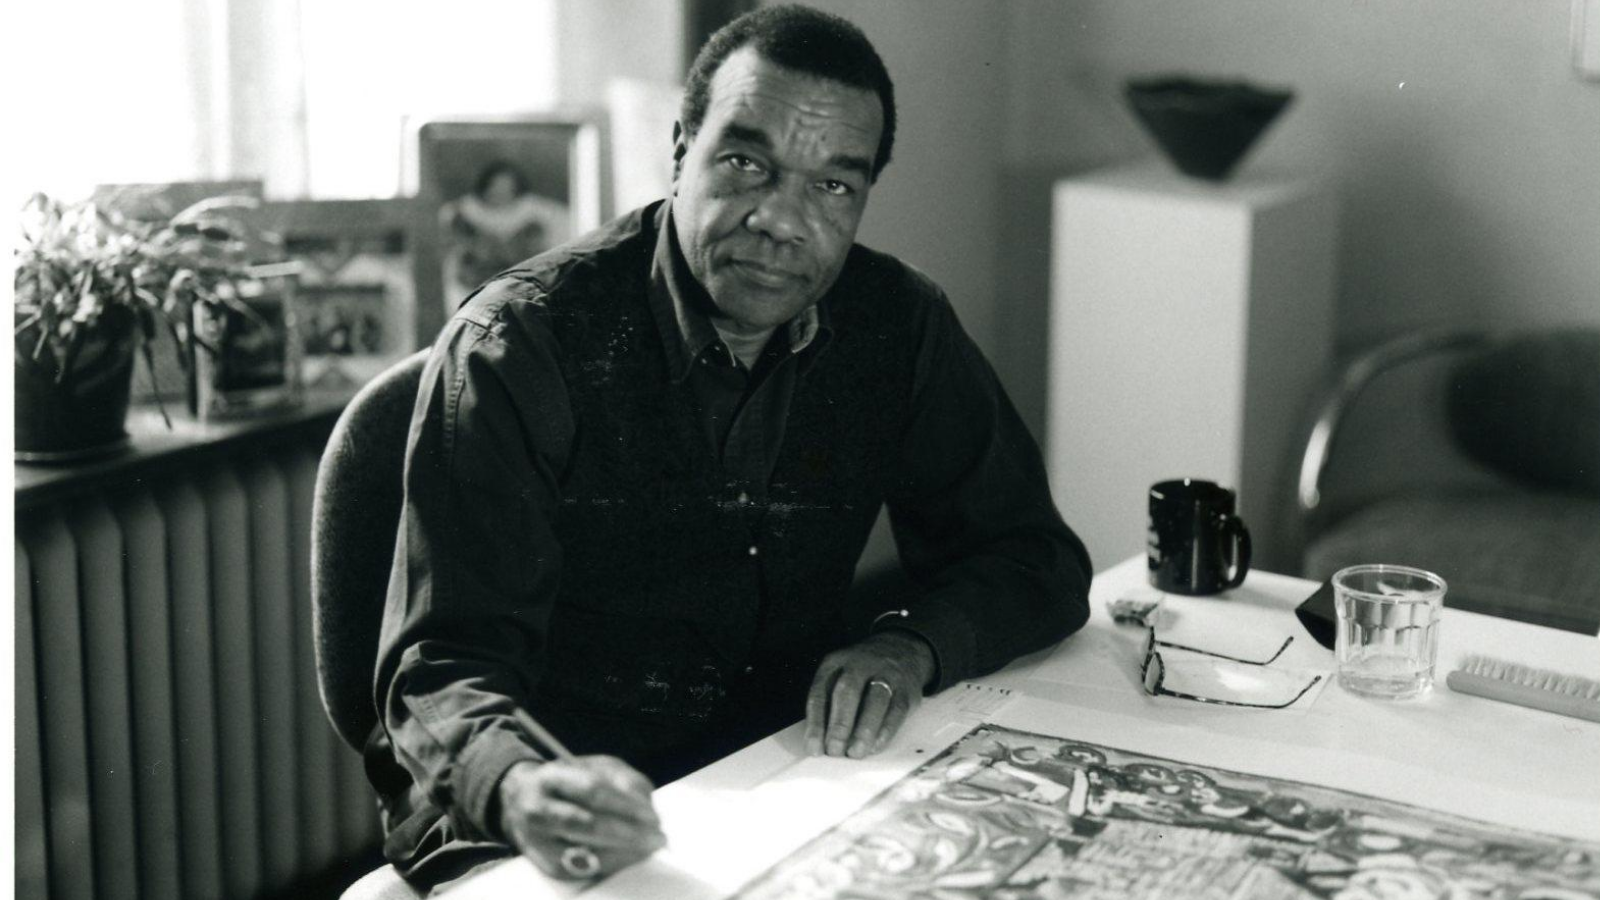 Inset David C. Driskell Papers